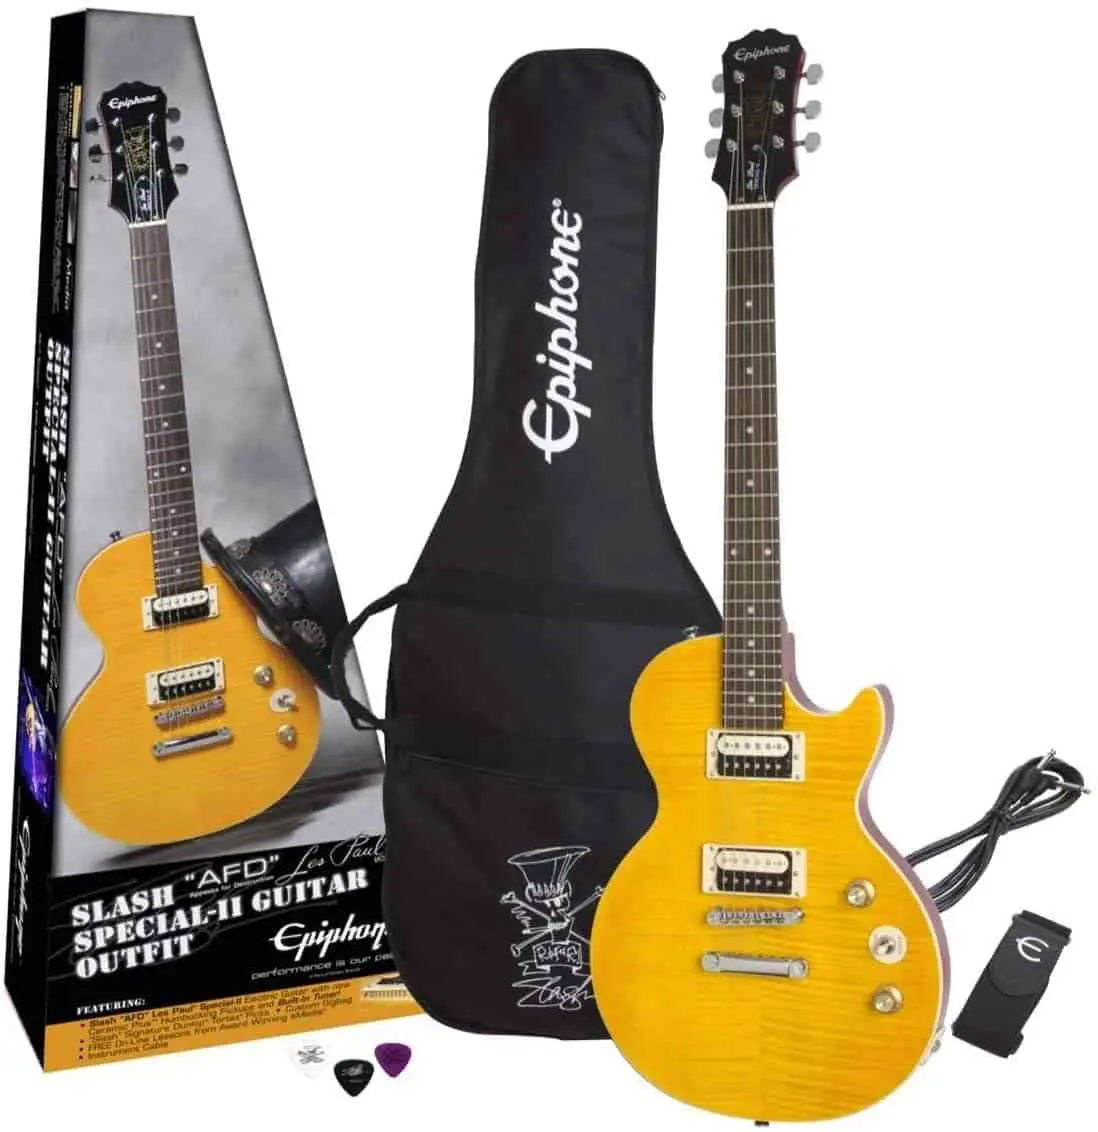 Best Les Paul for beginners- Epiphone Slash ‘AFD’ Les Paul Special II Outfit